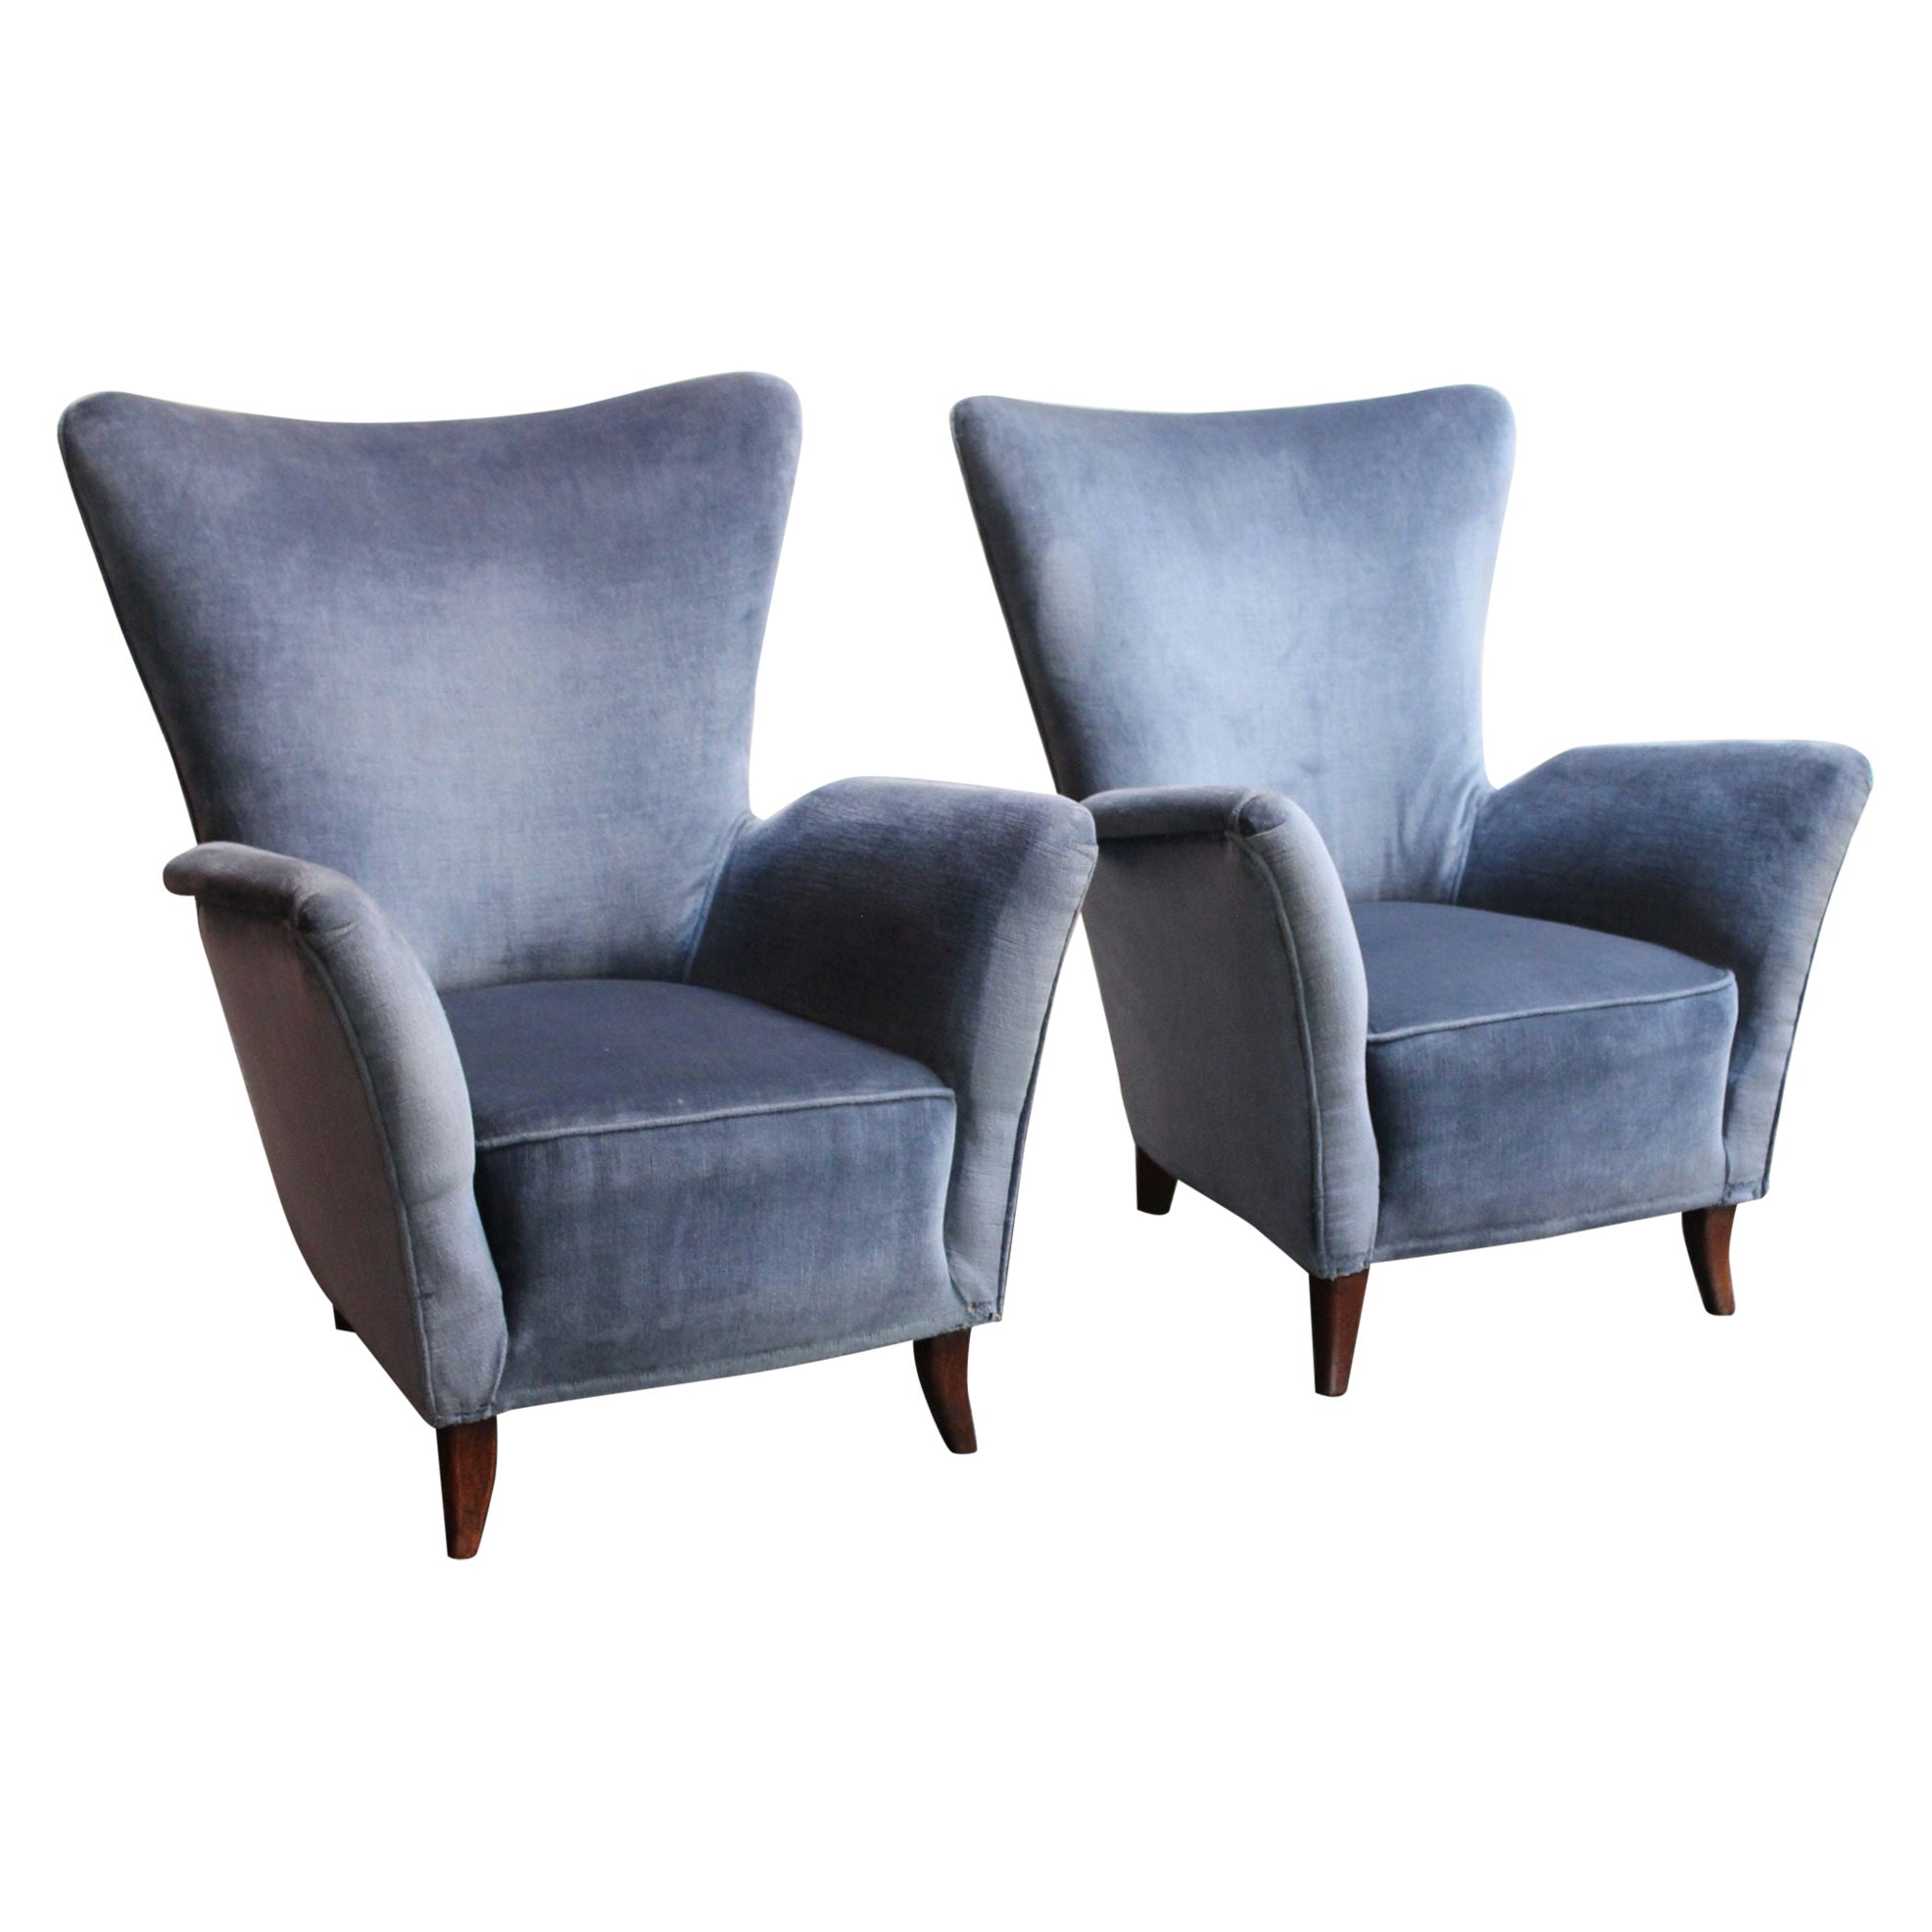 Pair of Mid-Century Italian Modern Blue Velvet Sculptural Wingback Lounge Chairs For Sale